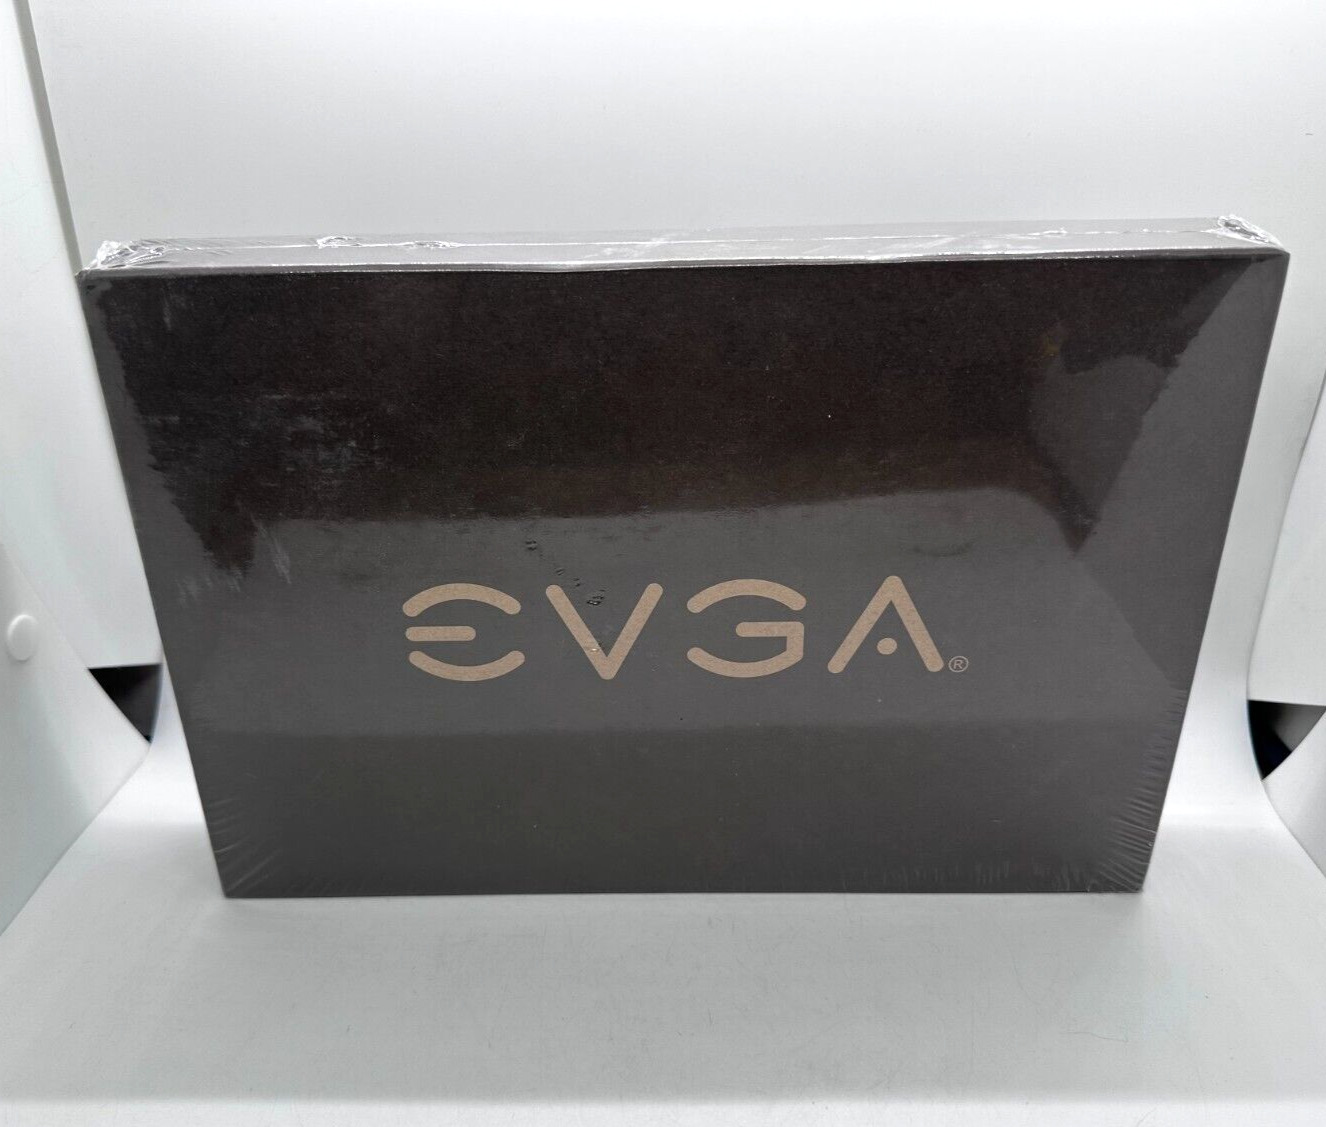 NEW SEALED EVGA GeForce 8400 GS 1GB DDR3 PCI-E Video Card 01G-P3-1302-RX